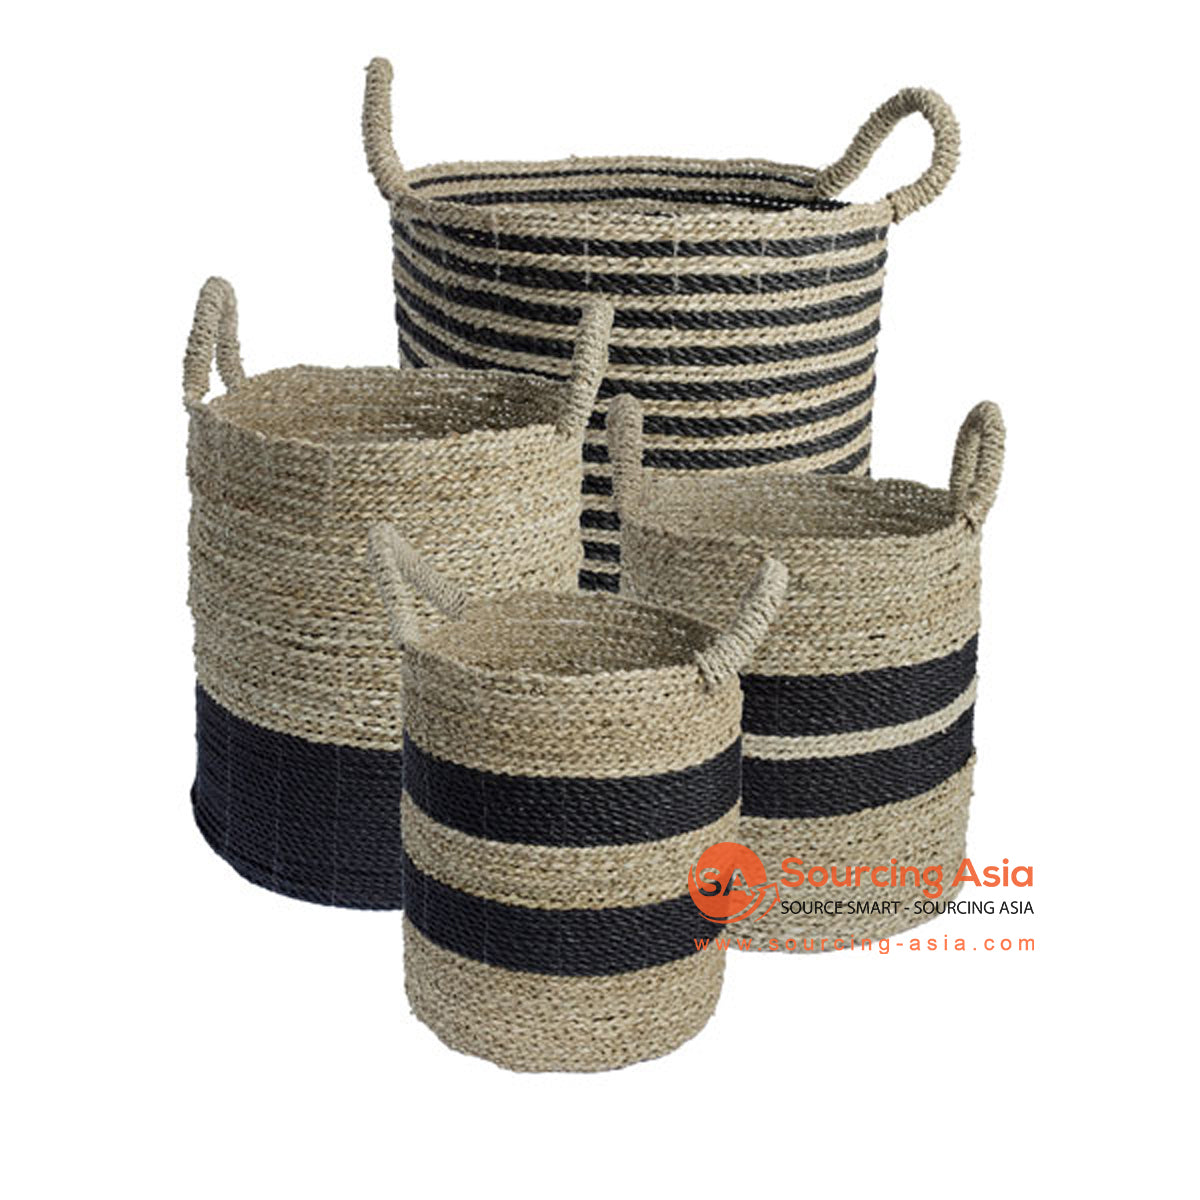 SHL168-6 SET OF FOUR NATURAL AND BLACK SEAGRASS BASKETS WITH HANDLE